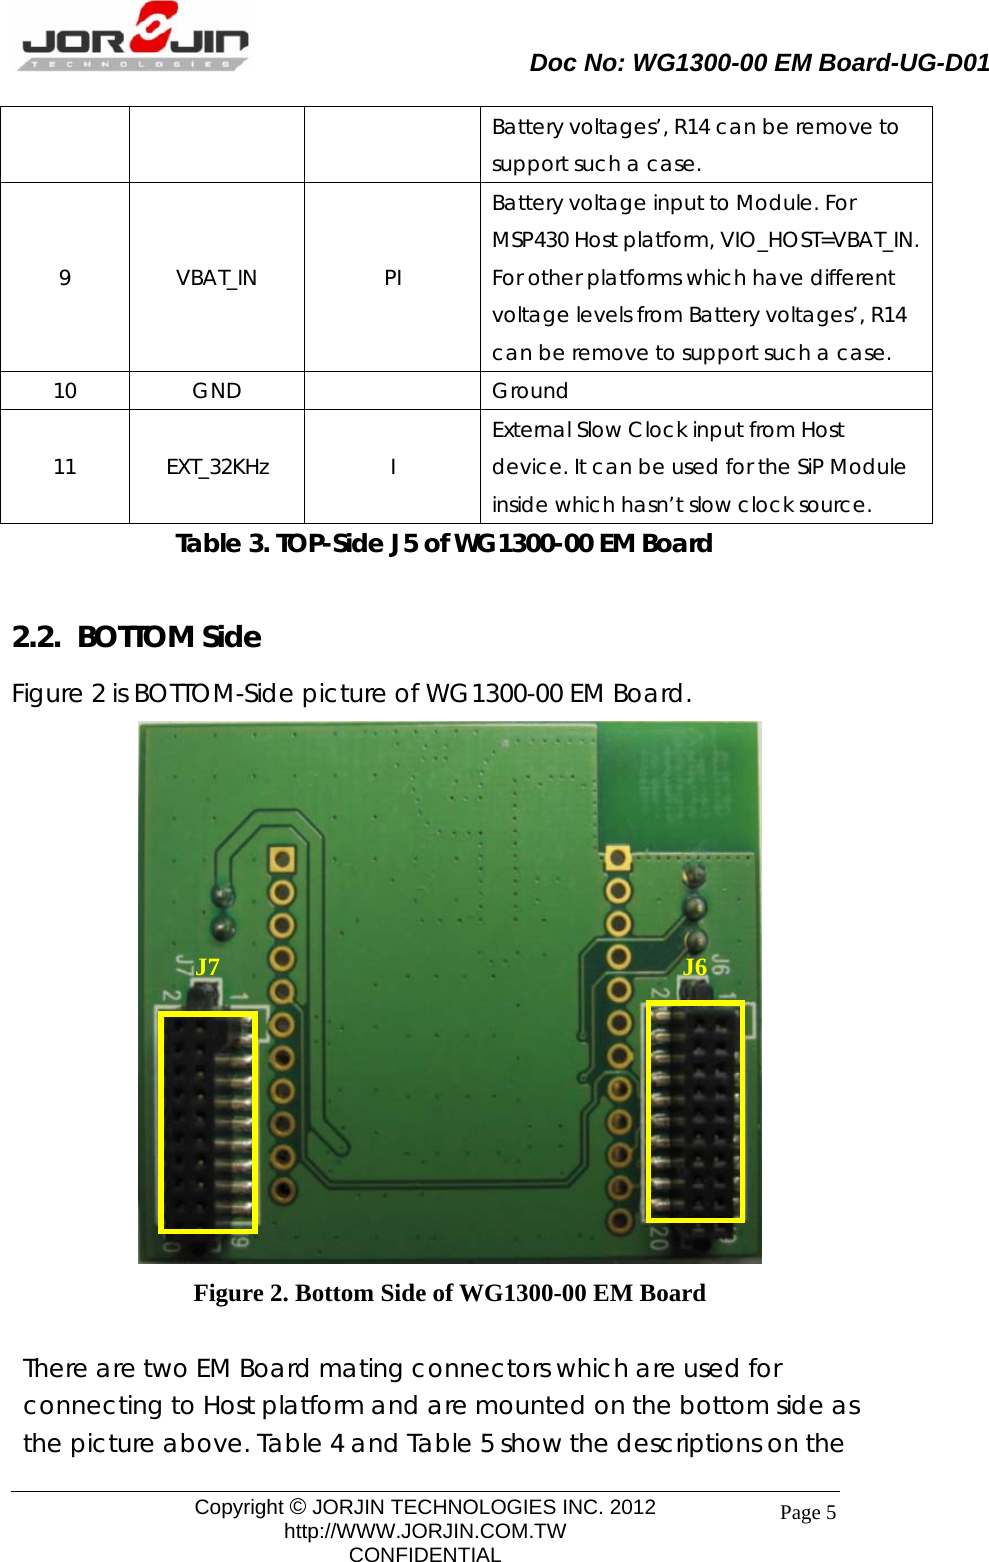                       Doc No: WG1300-00 EM Board-UG-D01                                                                                        Copyright © JORJIN TECHNOLOGIES INC. 2012 http://WWW.JORJIN.COM.TW CONFIDENTIAL Page 5Battery voltages’, R14 can be remove to support such a case.   9   VBAT_IN   PI Battery voltage input to Module. For MSP430 Host platform, VIO_HOST=VBAT_IN. For other platforms which have different voltage levels from Battery voltages’, R14 can be remove to support such a case. 10 GND   Ground  11  EXT_32KHz  I External Slow Clock input from Host device. It can be used for the SiP Module inside which hasn’t slow clock source.   Table 3. TOP-Side J5 of WG1300-00 EM Board  2.2.  BOTTOM Side Figure 2 is BOTTOM-Side picture of WG1300-00 EM Board.  Figure 2. Bottom Side of WG1300-00 EM Board  There are two EM Board mating connectors which are used for connecting to Host platform and are mounted on the bottom side as the picture above. Table 4 and Table 5 show the descriptions on the J6 J7 